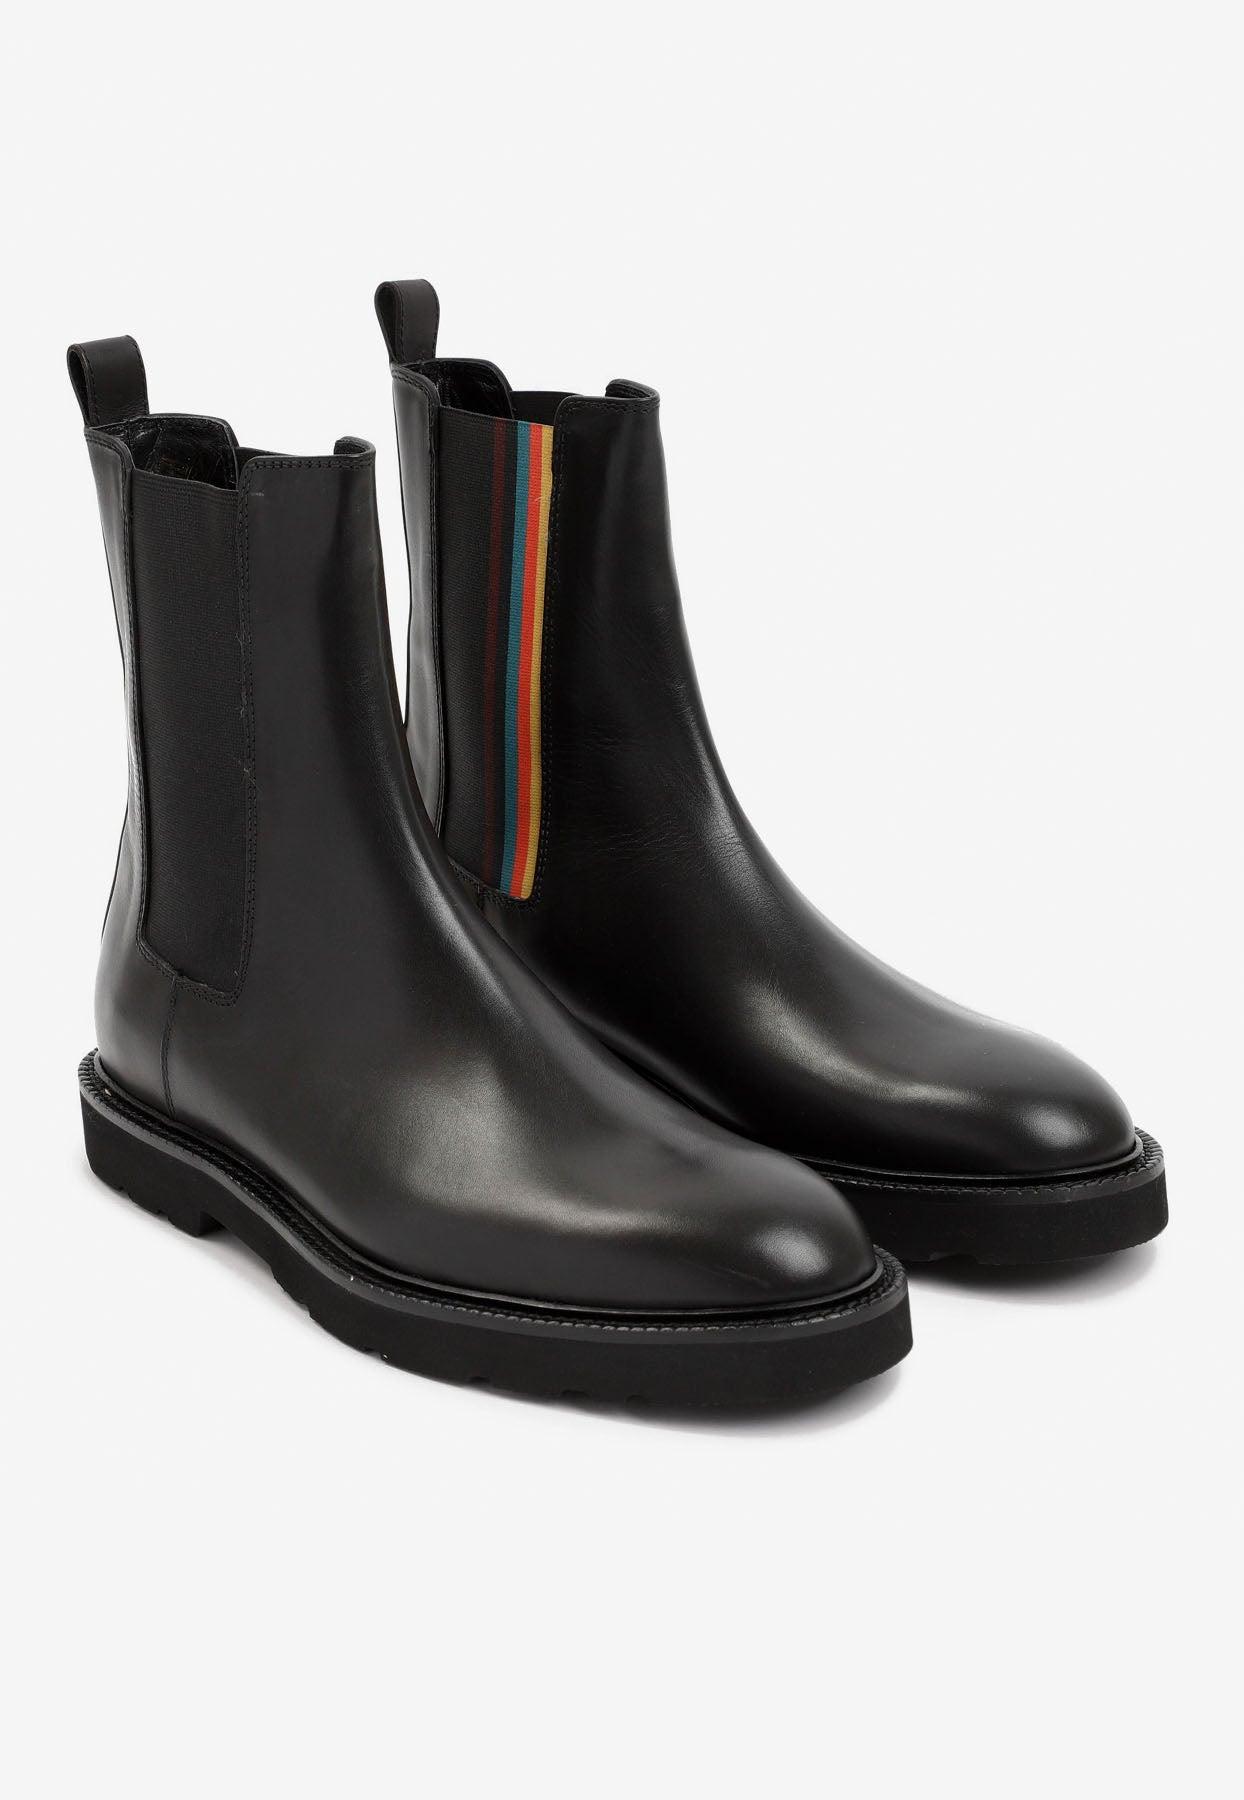 Paul Smith Elton Slip-on Boots In Leather in Black for Men | Lyst